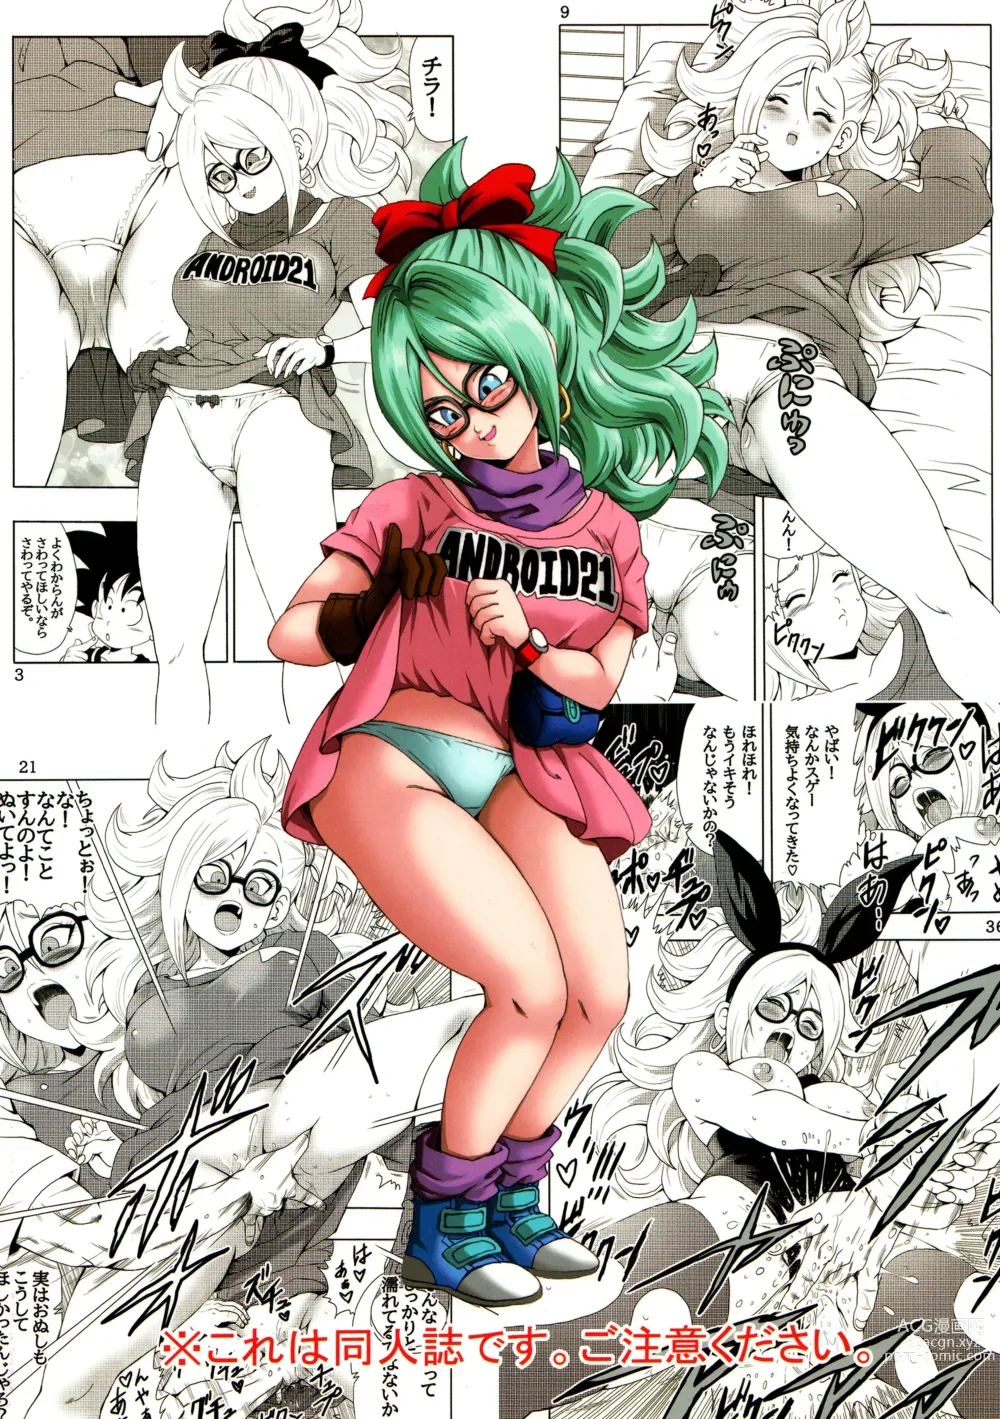 Page 46 of doujinshi Episode of Bulma - Android 21 Version